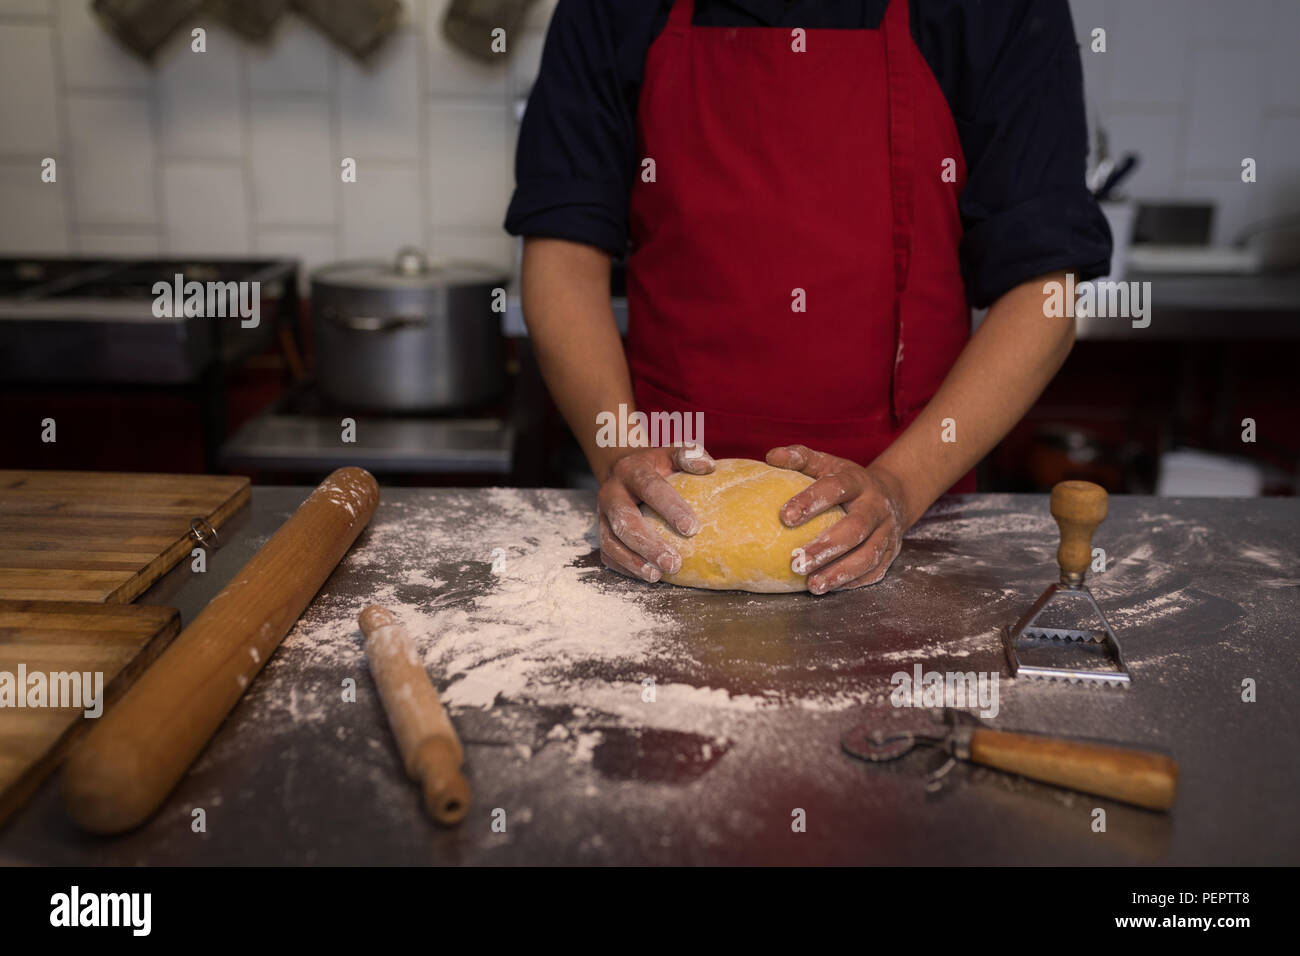 Baker holding a proof dough Stock Photo